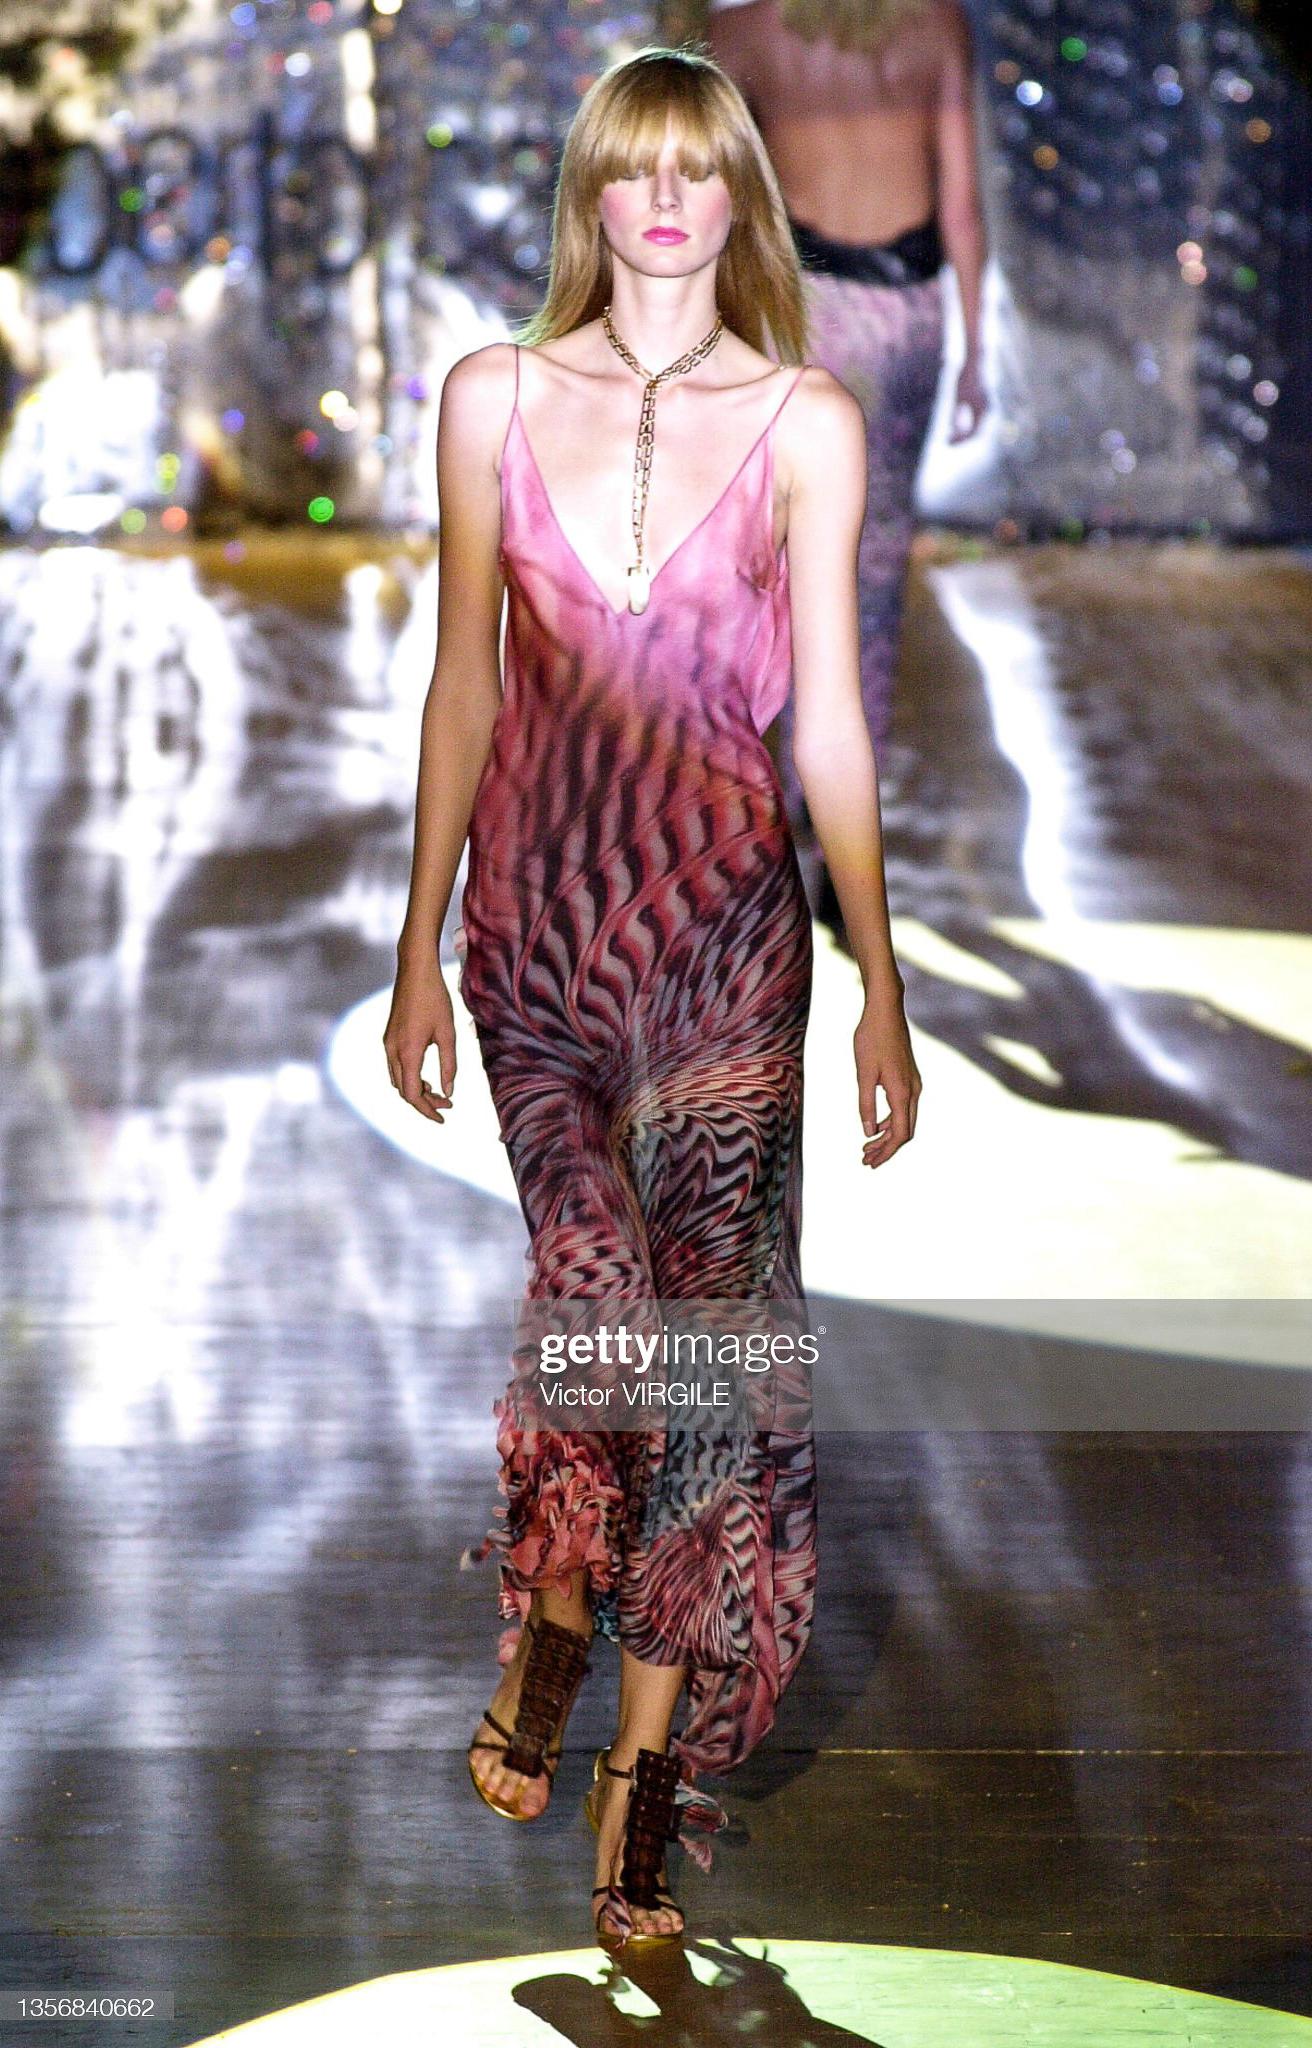 S/S 2001 Roberto Cavalli psychedelic silk slip gown. Pink slip dress with psychedelic print throughout, and silk chiffon ruffle details at back hem. V-neck sleeveless dress with open drape back. 100% silk. As seen on the runway. 